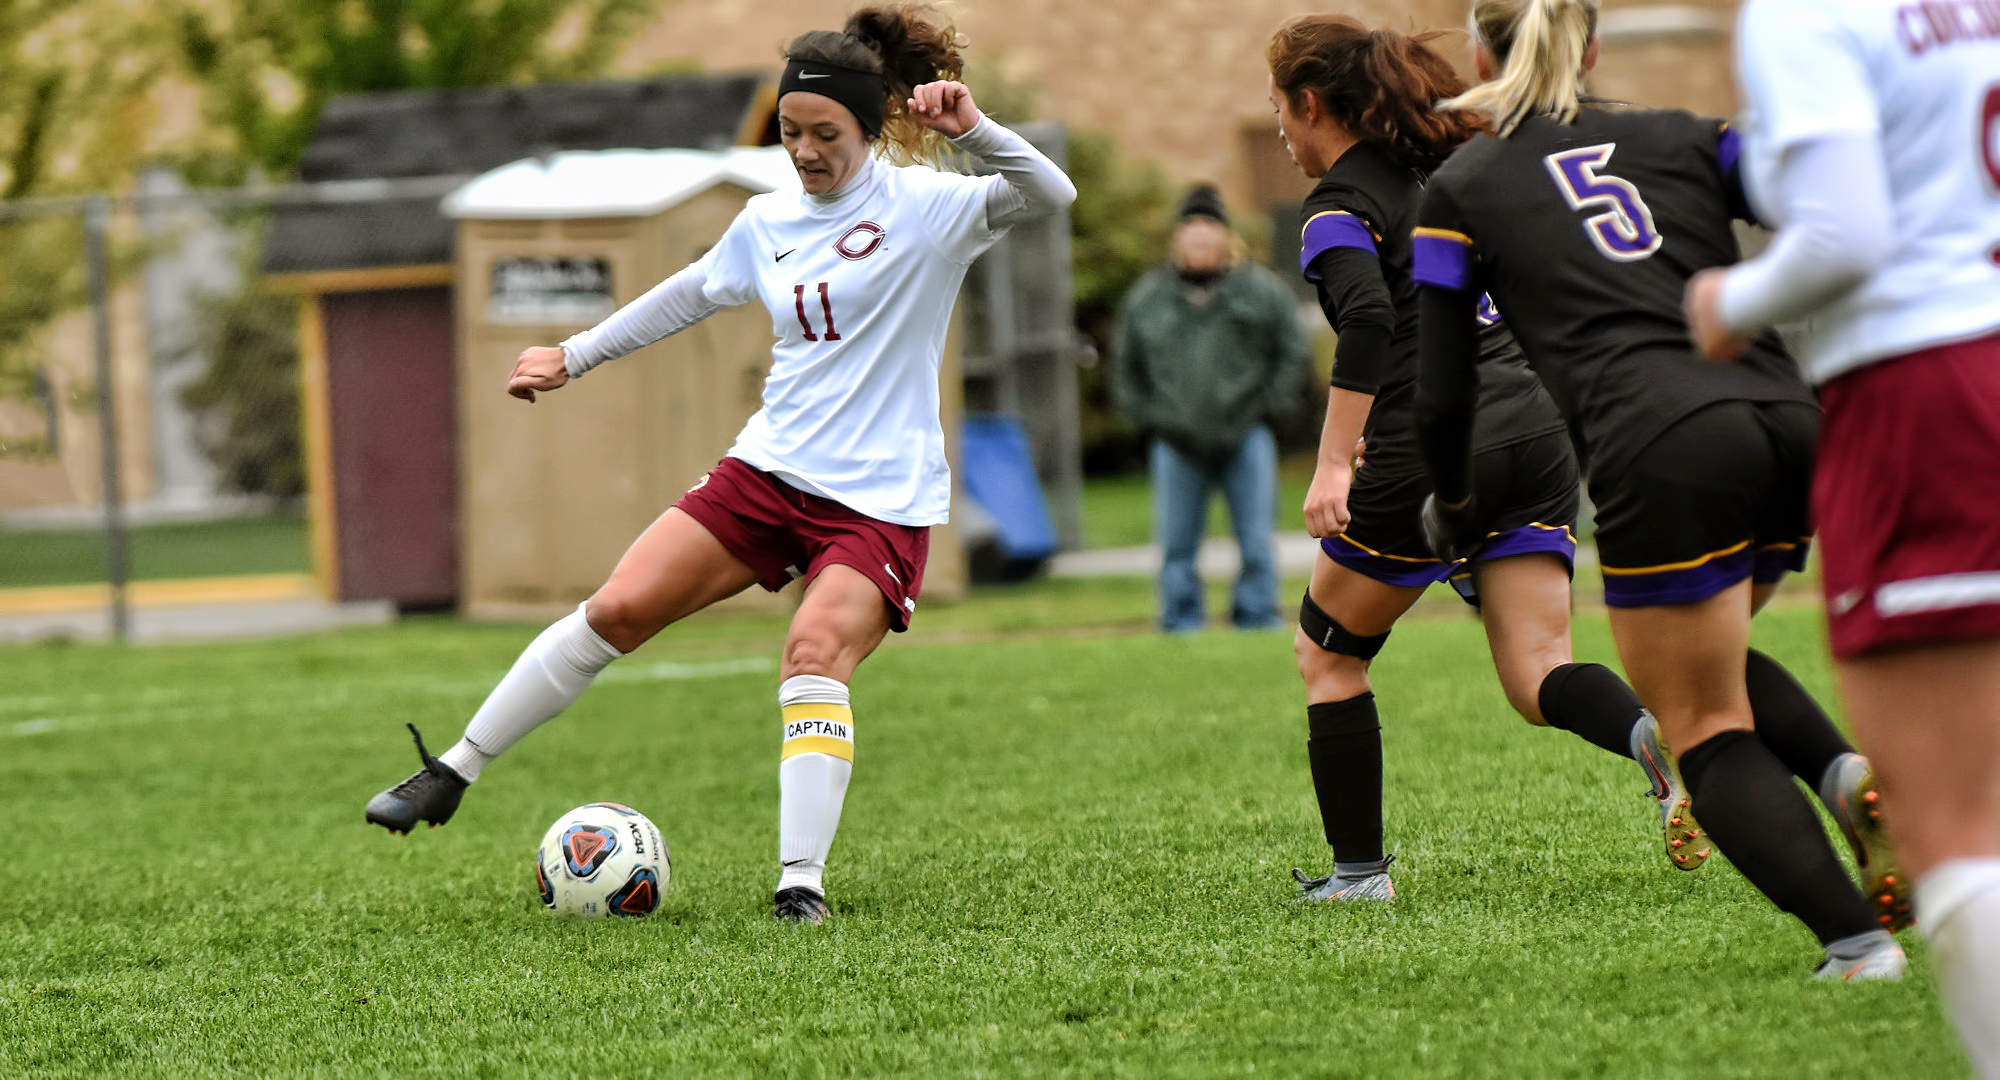 Senior Karsen Granning had a chance in the first in the Cobbers' game at St. Olaf as she played in her final college game.